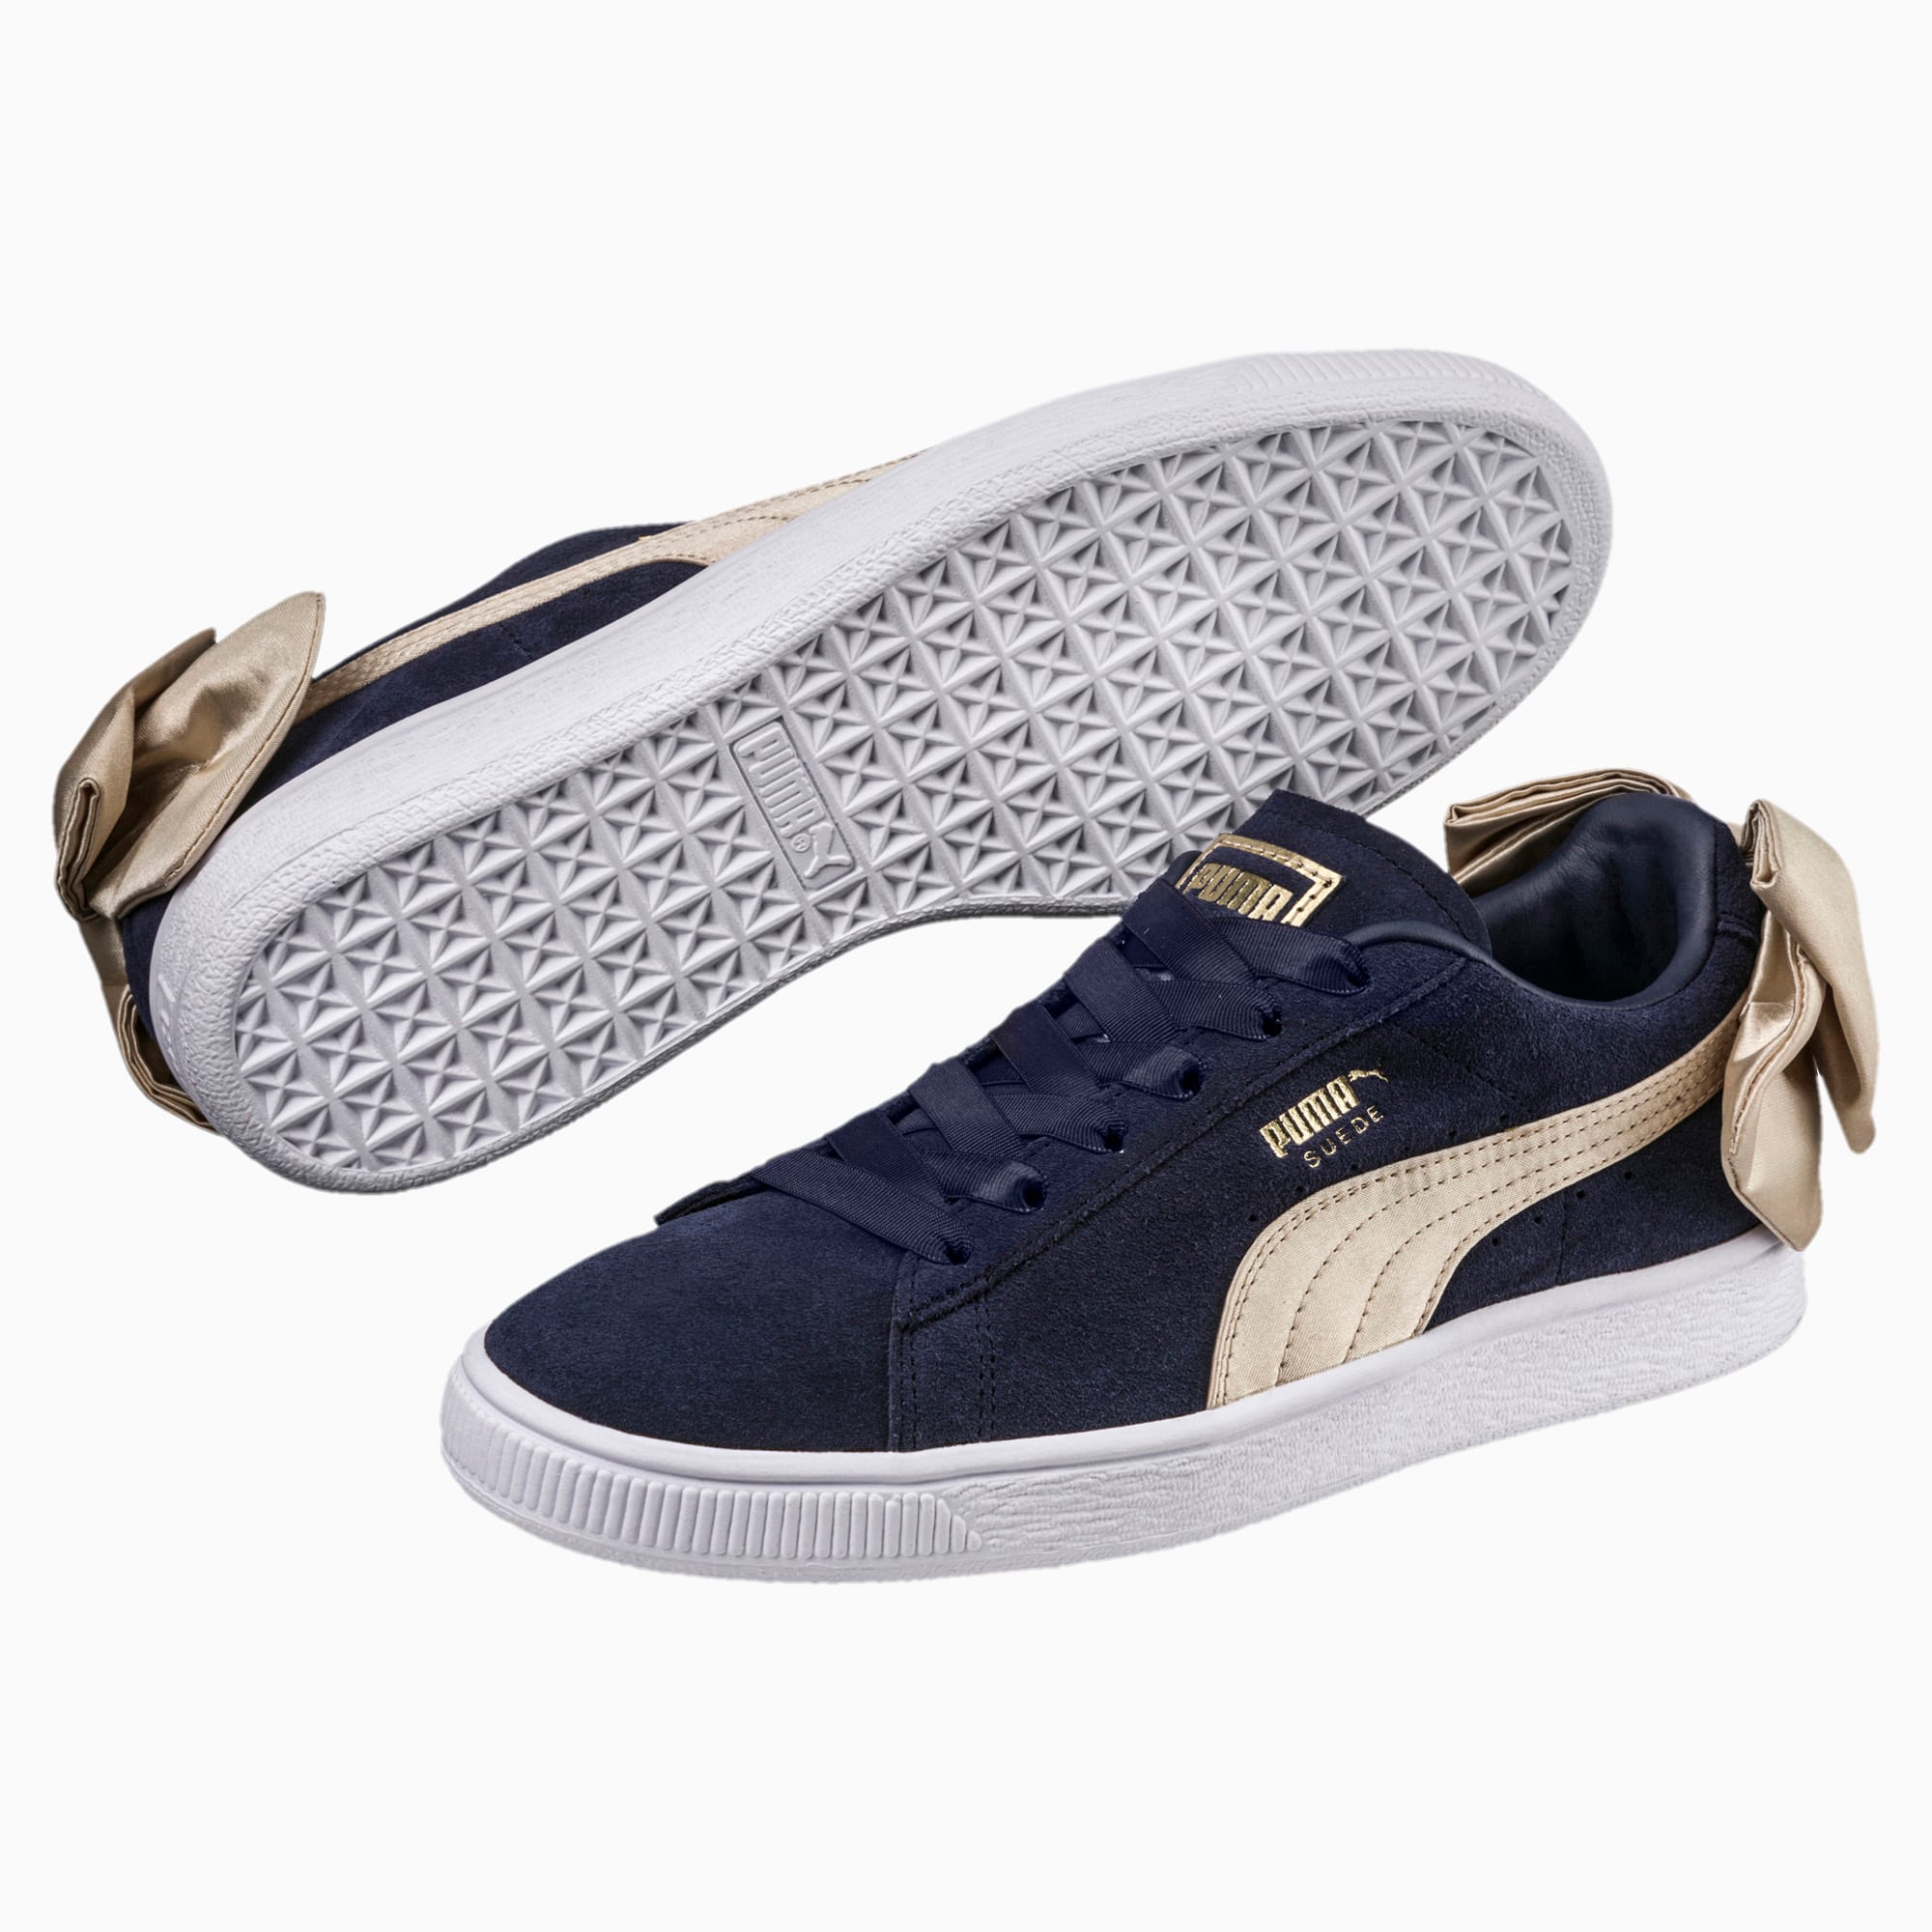 puma shoes with bow